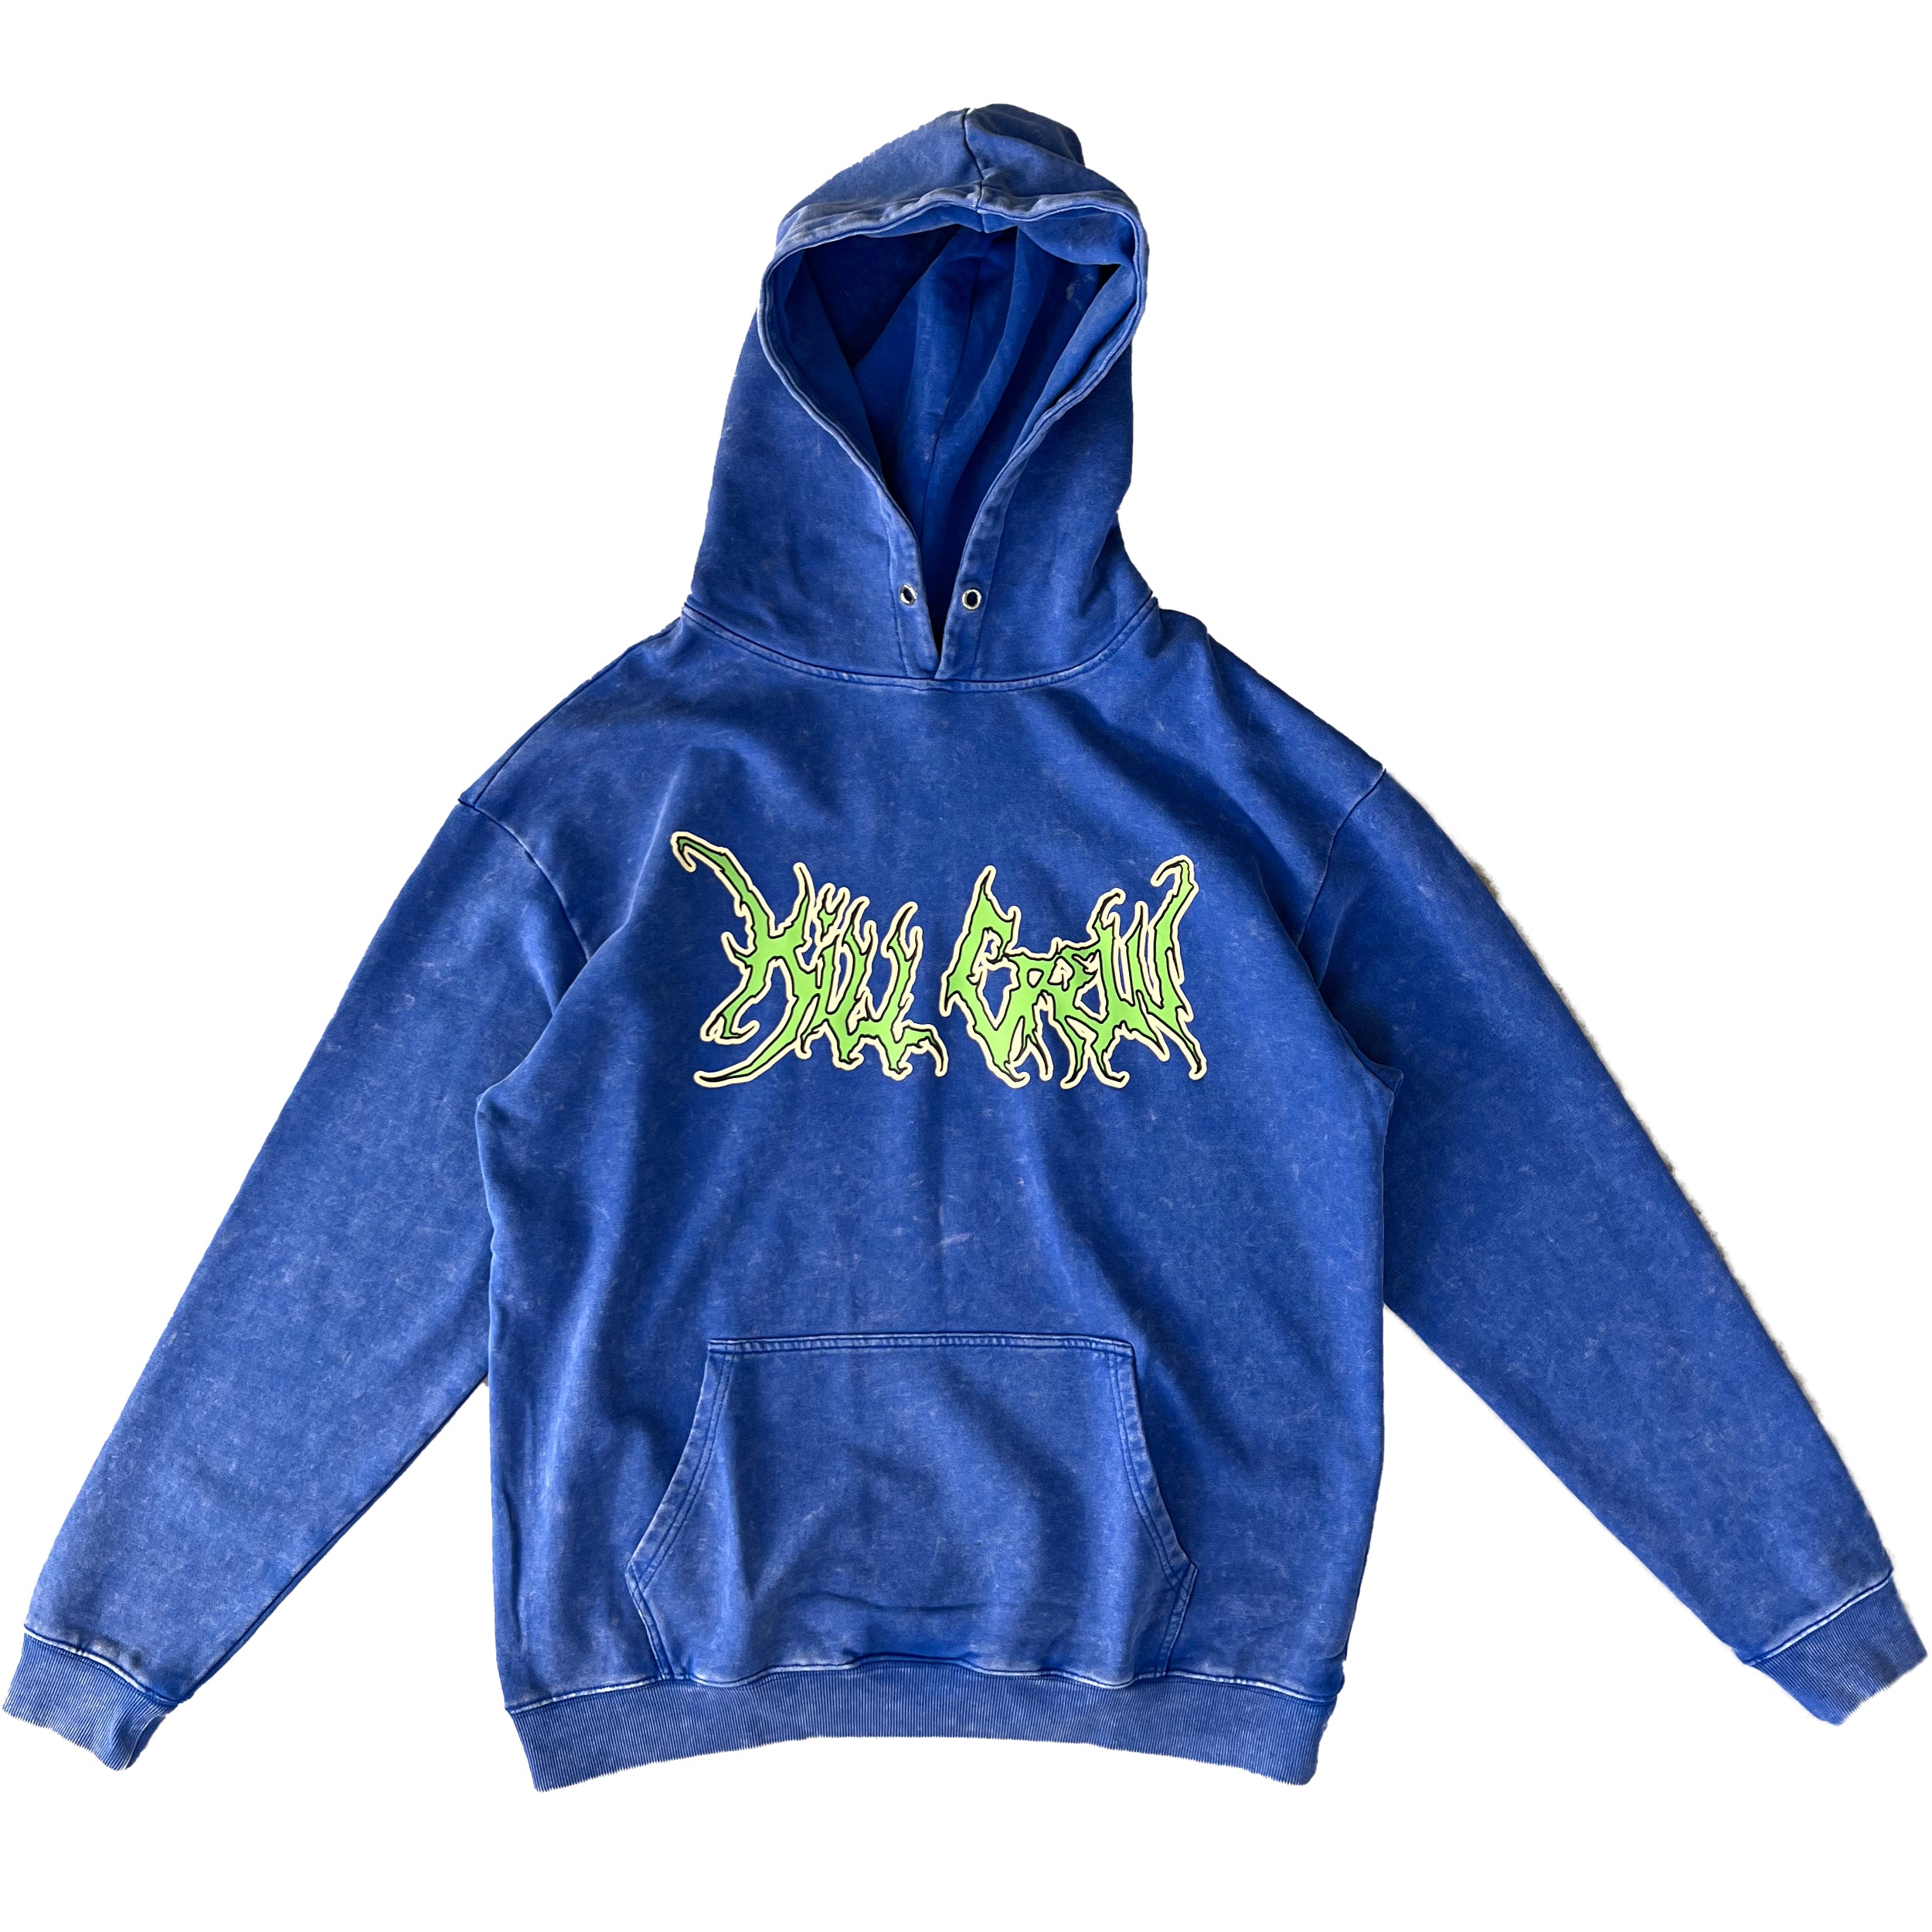 OVERSIZED LUX WOLF HOODIE - BLUE / GREEN